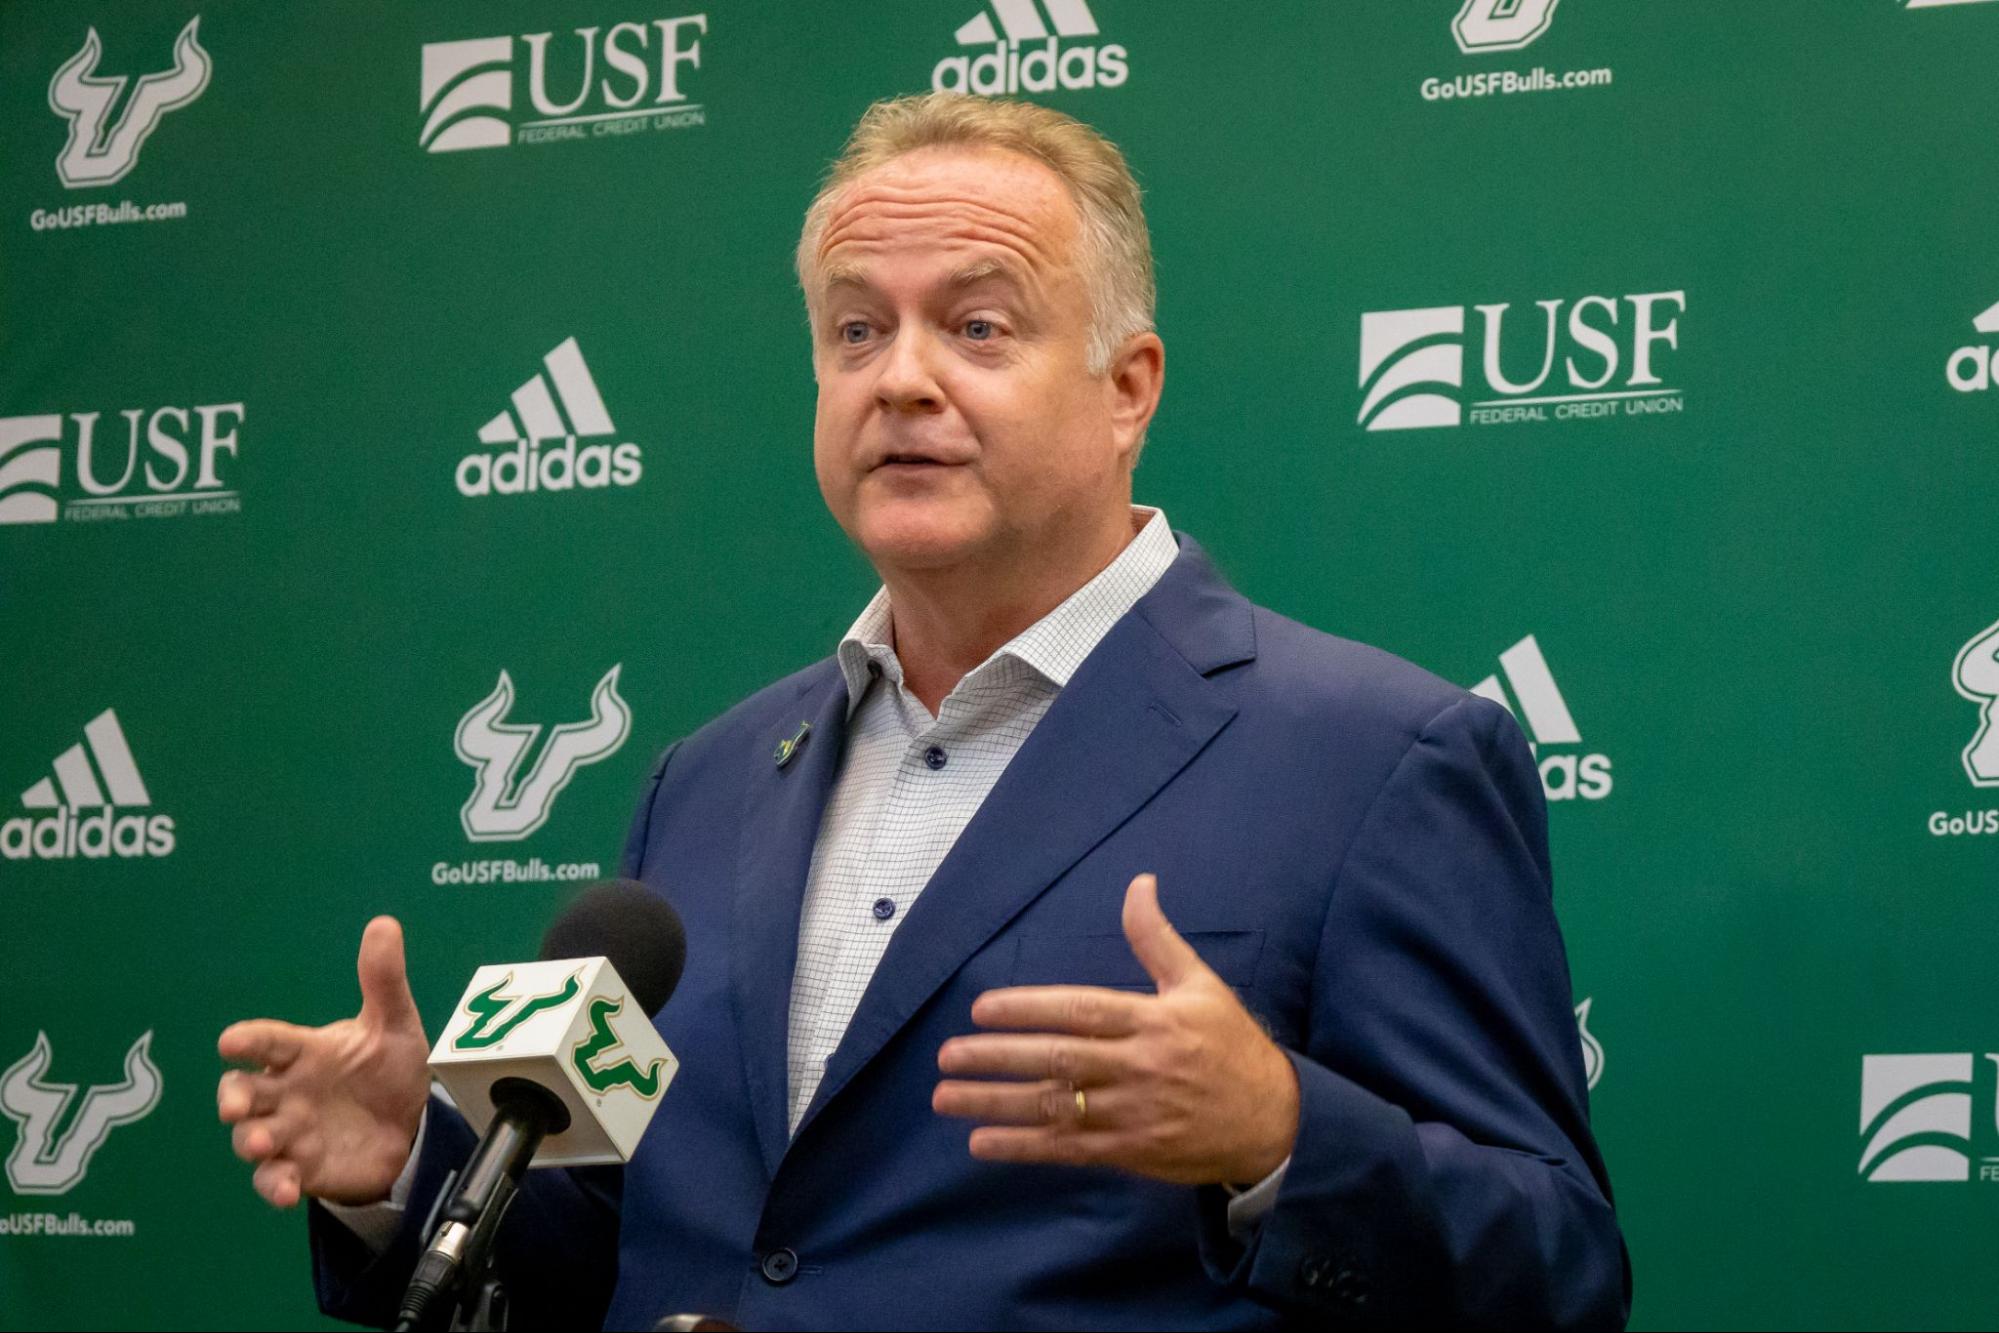 USF athletics director outlines football head coach search plan – The Oracle